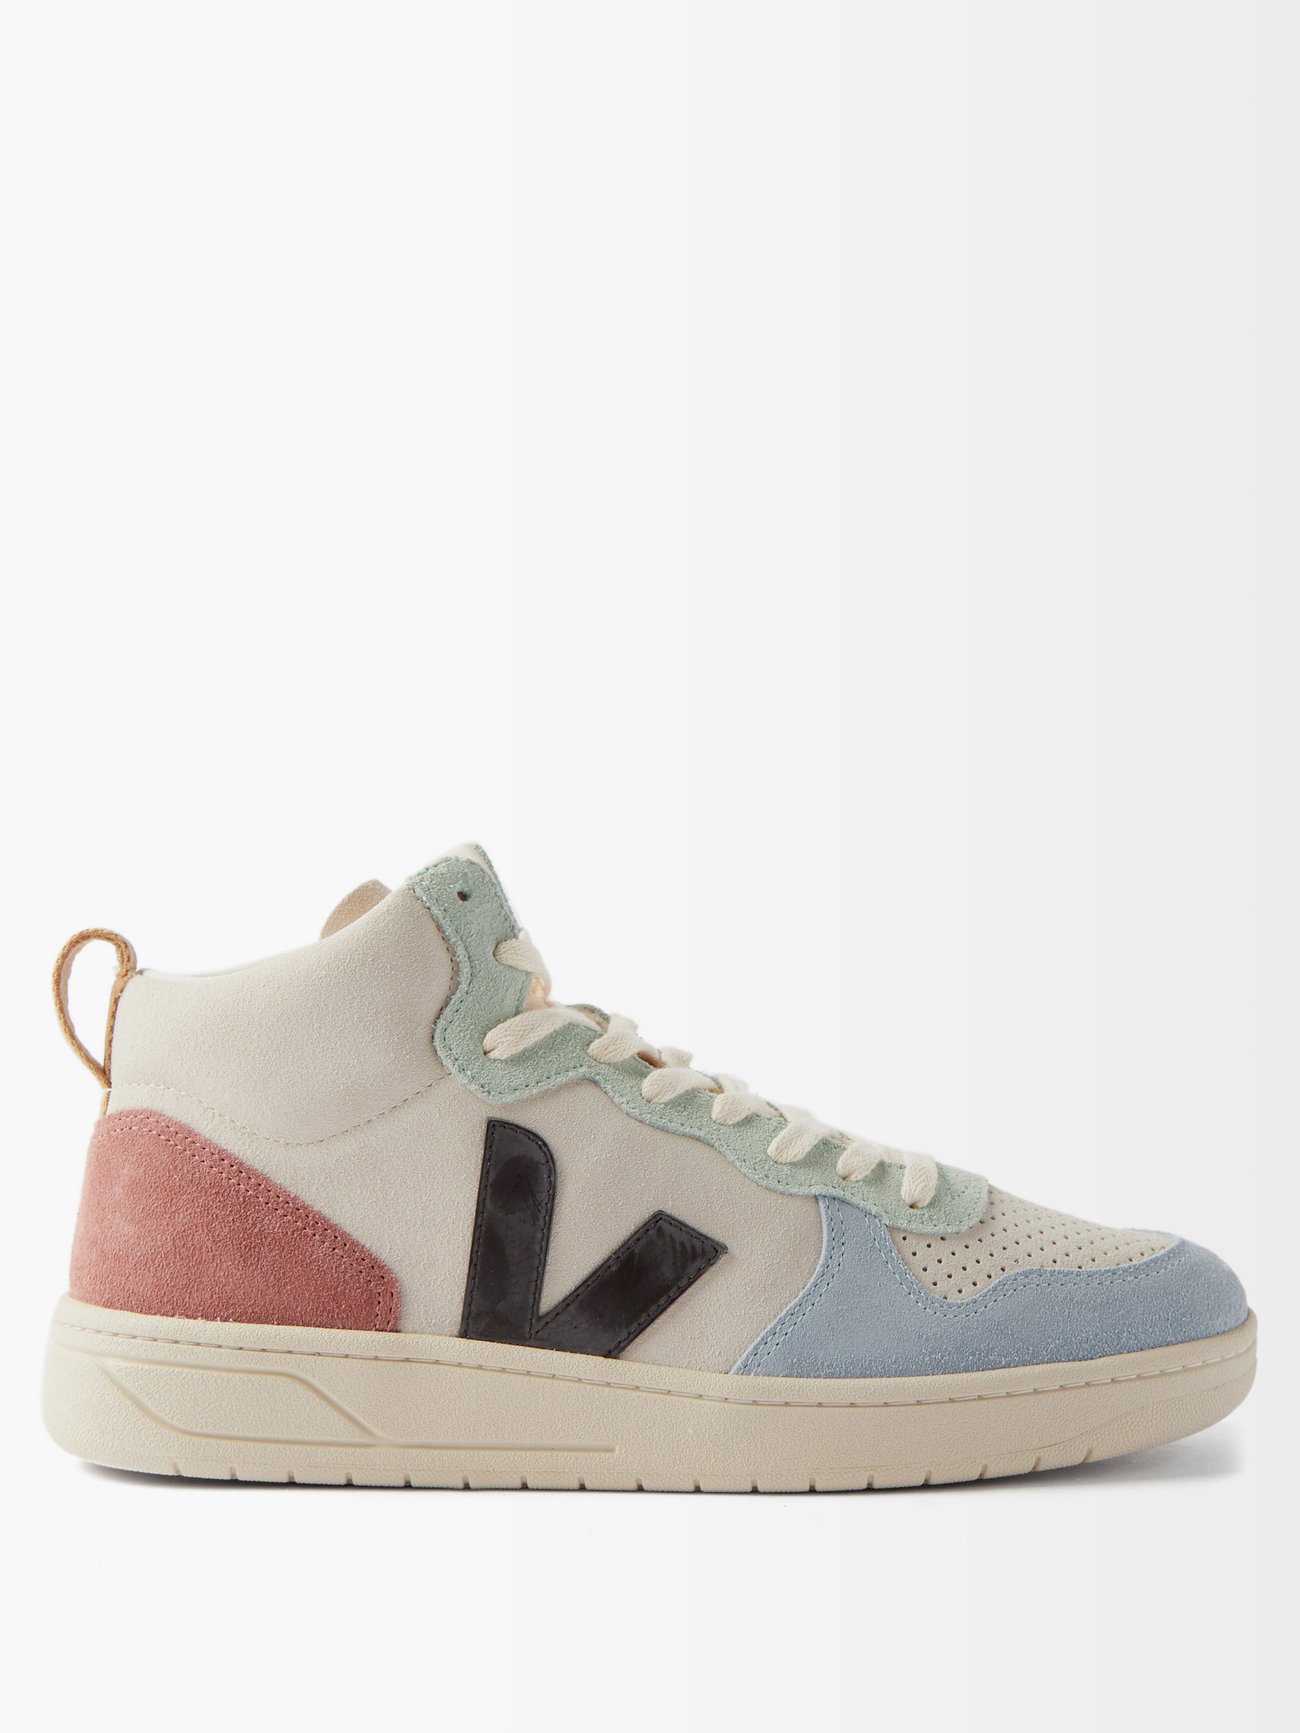 undefined | VEJA V-15 high-top nubuck and leather trainers